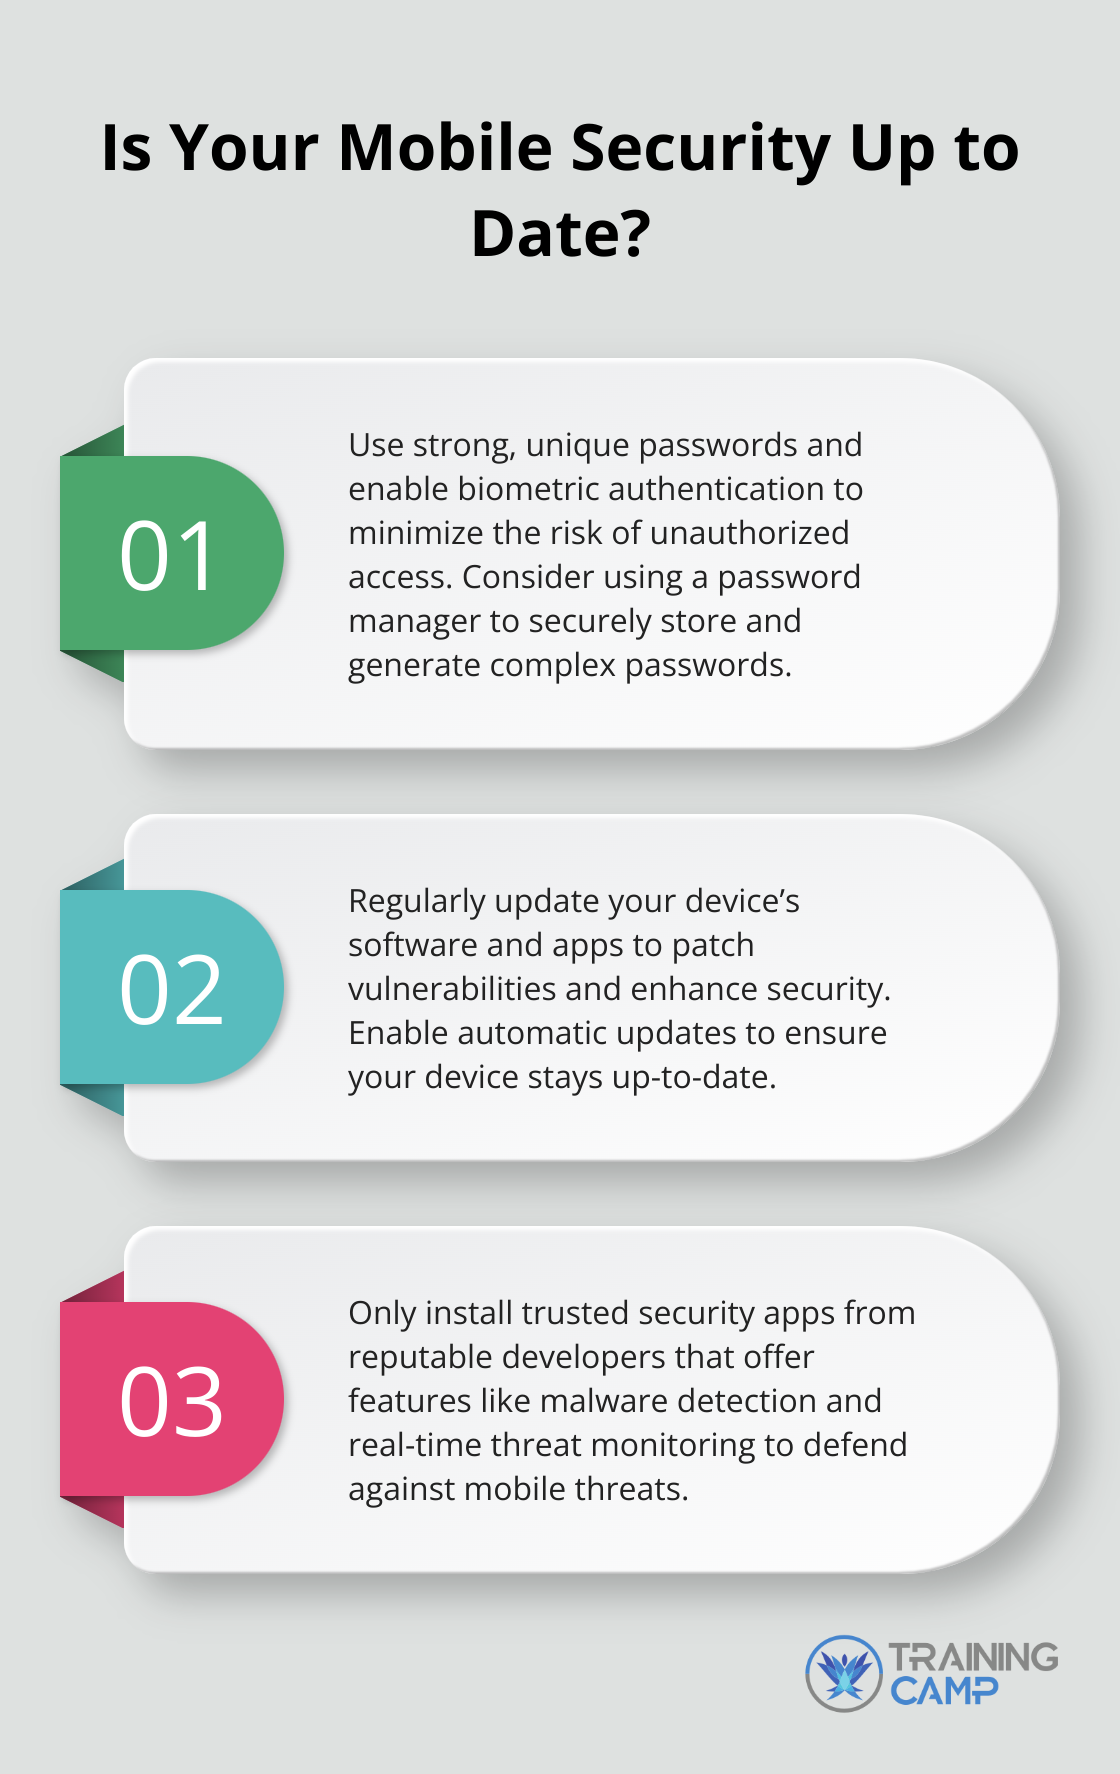 Fact - Is Your Mobile Security Up to Date?